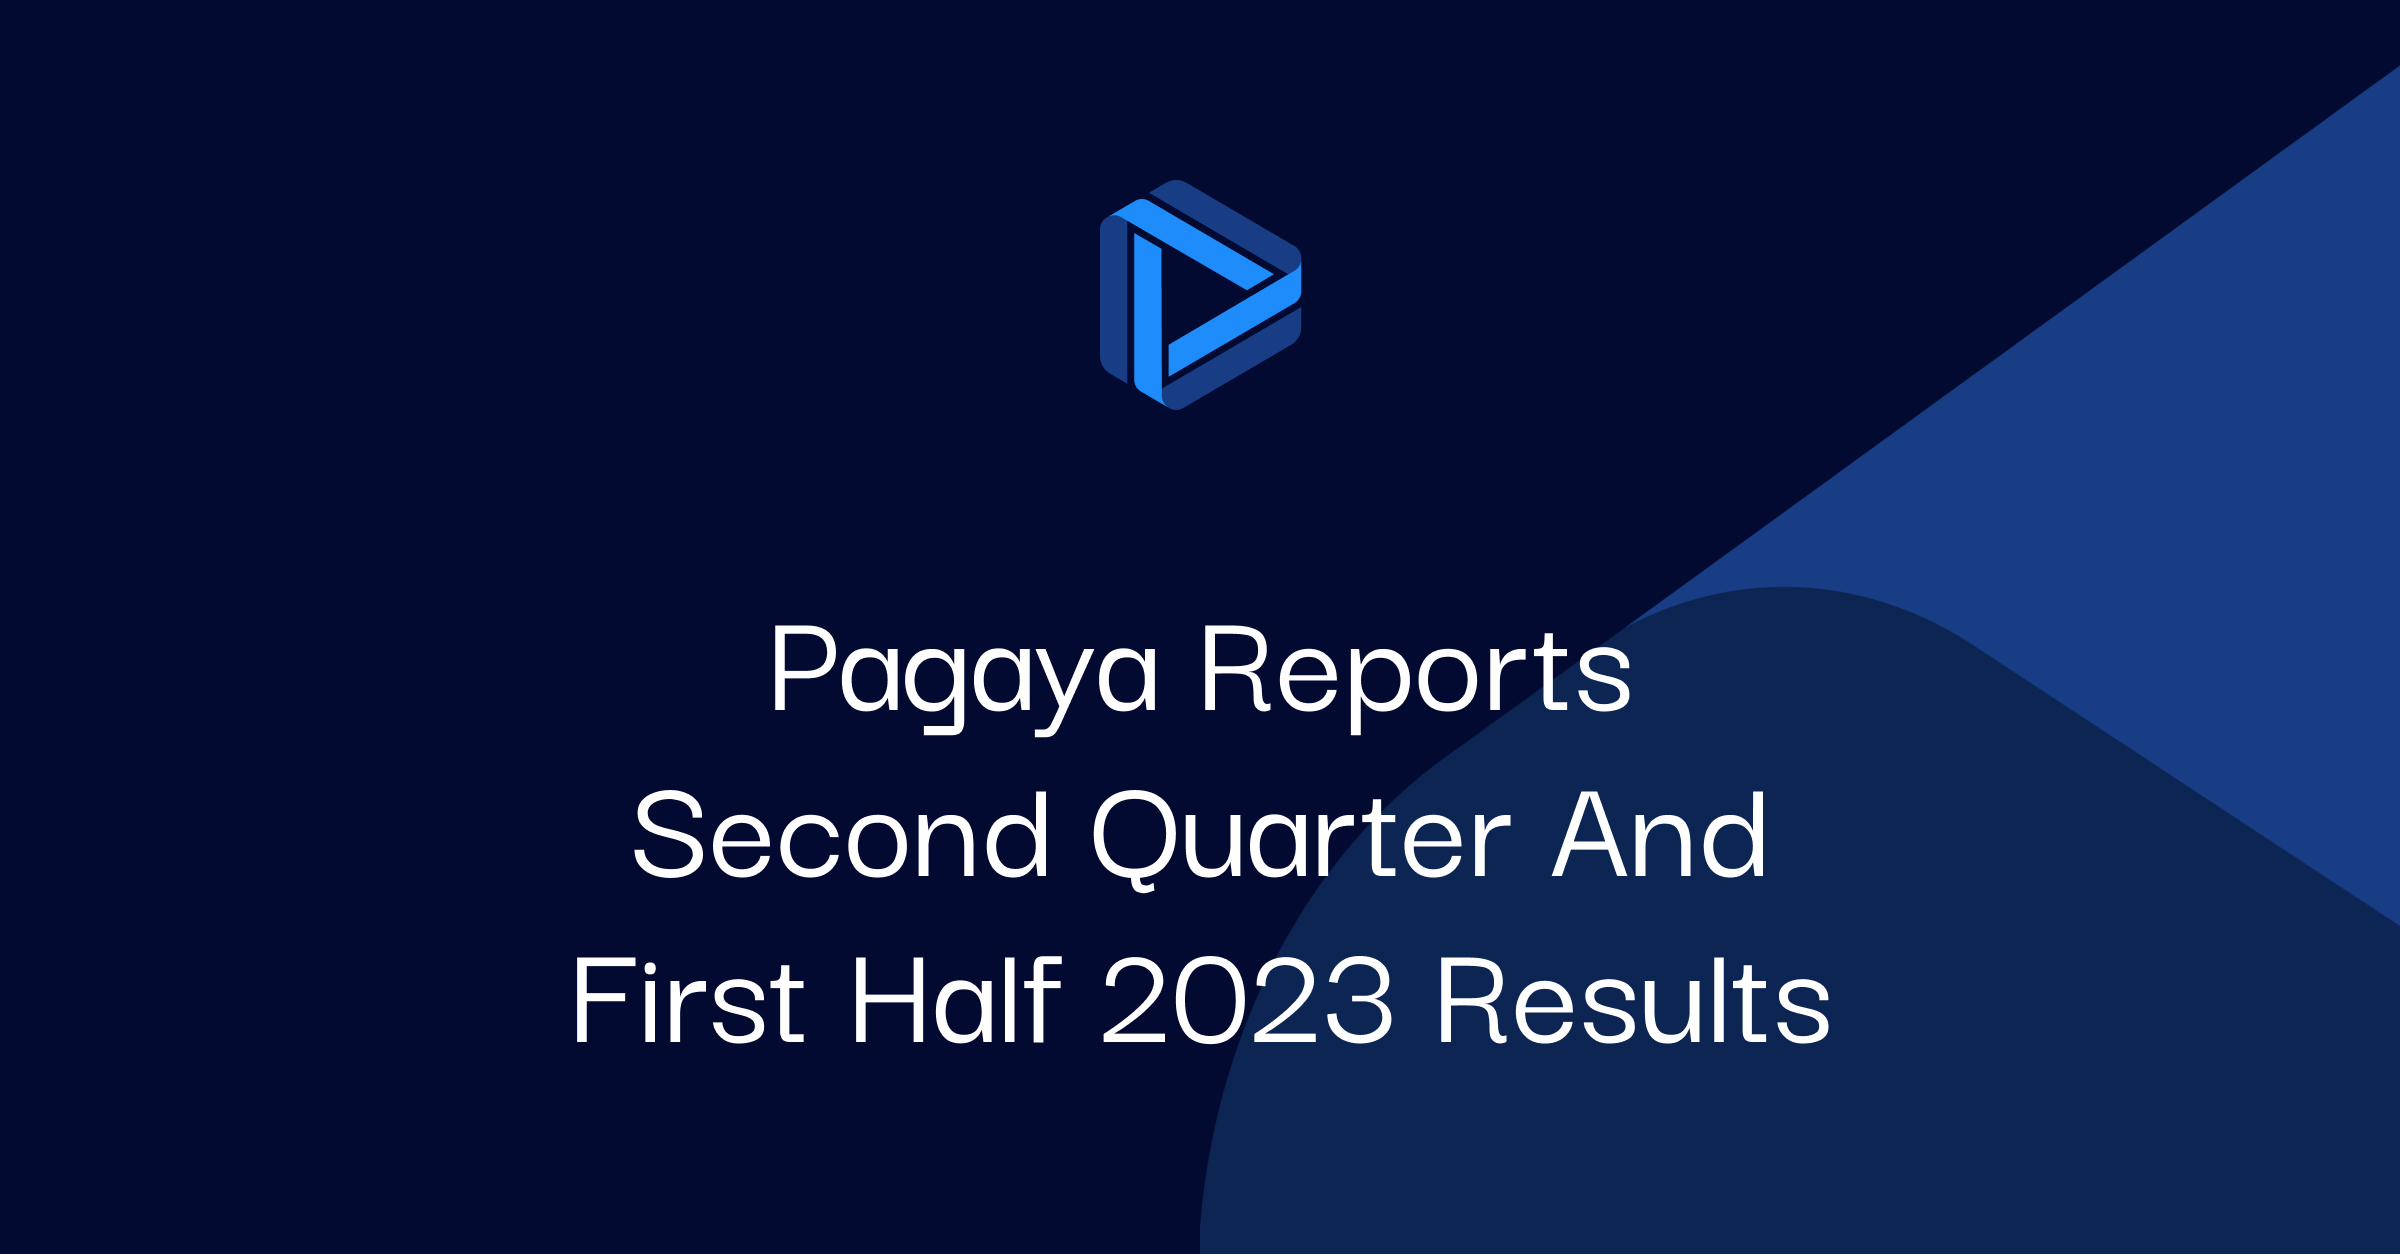 Pagaya Reports Second Quarter and First Half 2023 Results